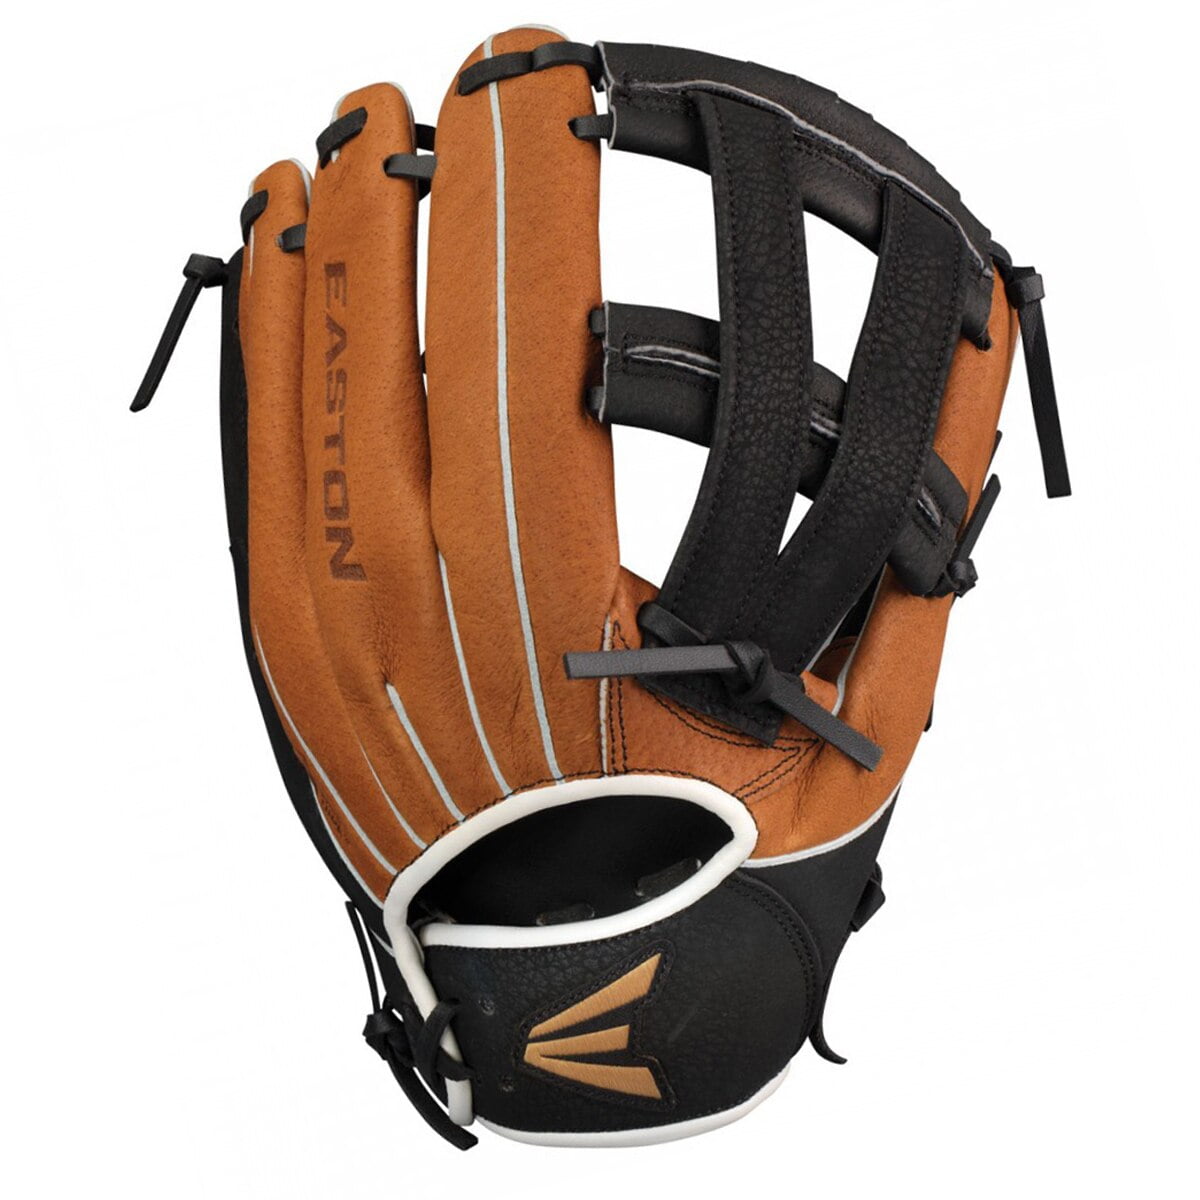 Soft Baseball and Carrying Baseball Bag Fit for Beginning Baseball Player 7 to 13 Years Old 10.5in Baseball Glove Teens Baseball Glove and Ball Set Brown Baseball Set with 25in Baseball Bat